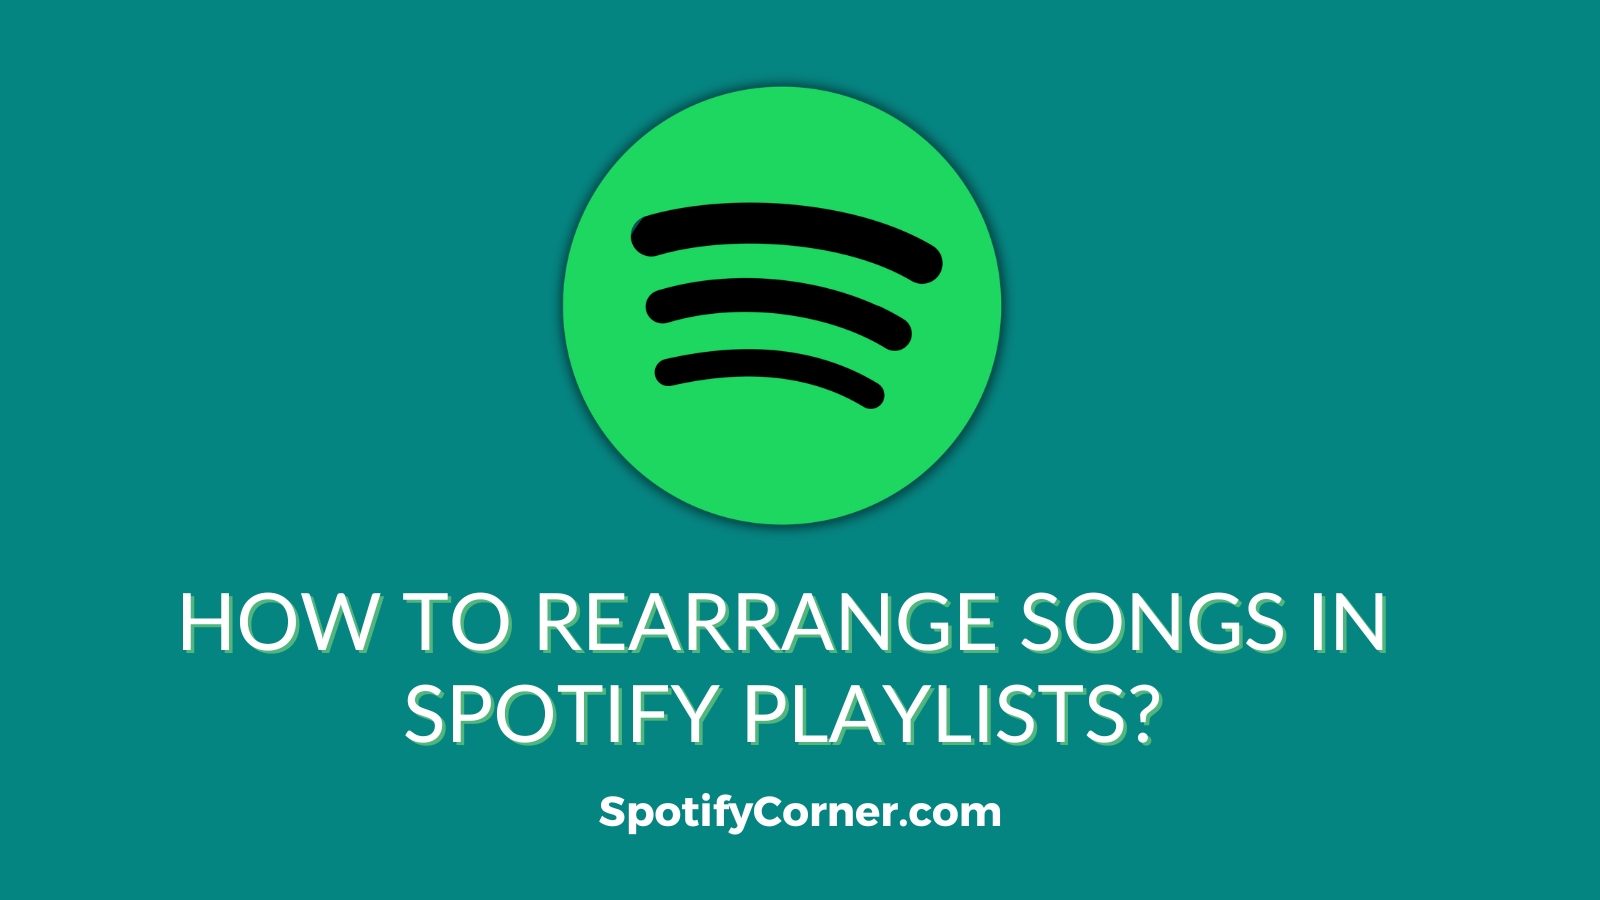 This articles helps you with step by step reordering the songs in Spotify playlists